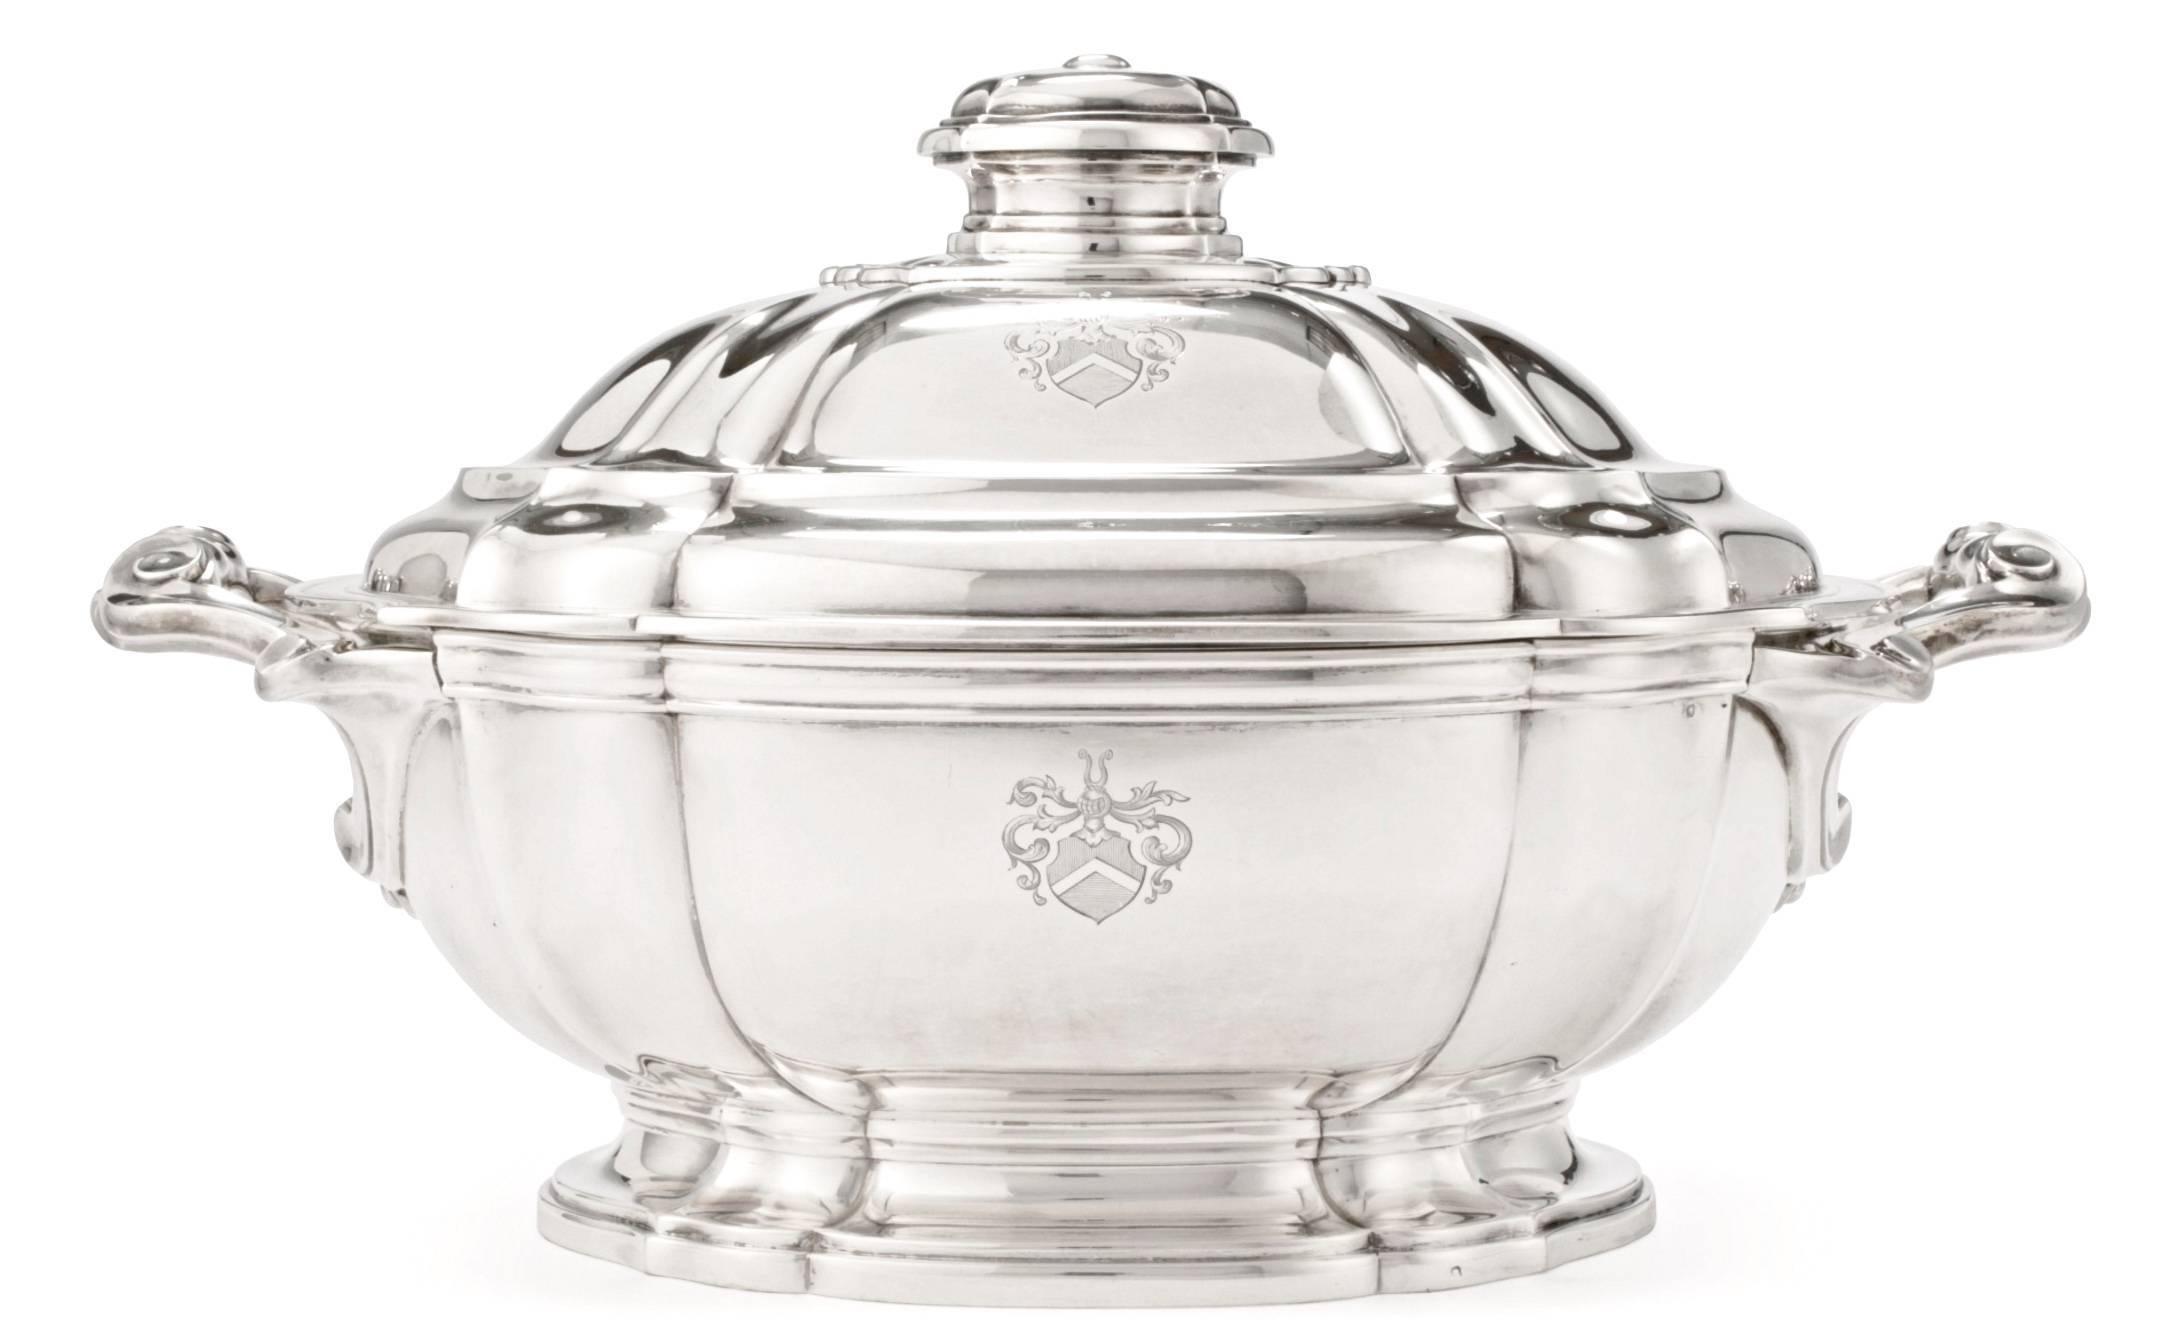 Exceptional quality, French, oval, sterling silver soup tureen and cover. Made by Tetard Freres of Paris, circa 1920. 
Matching hand engraved crest on one side of body and lid. 
Measures: 16.5